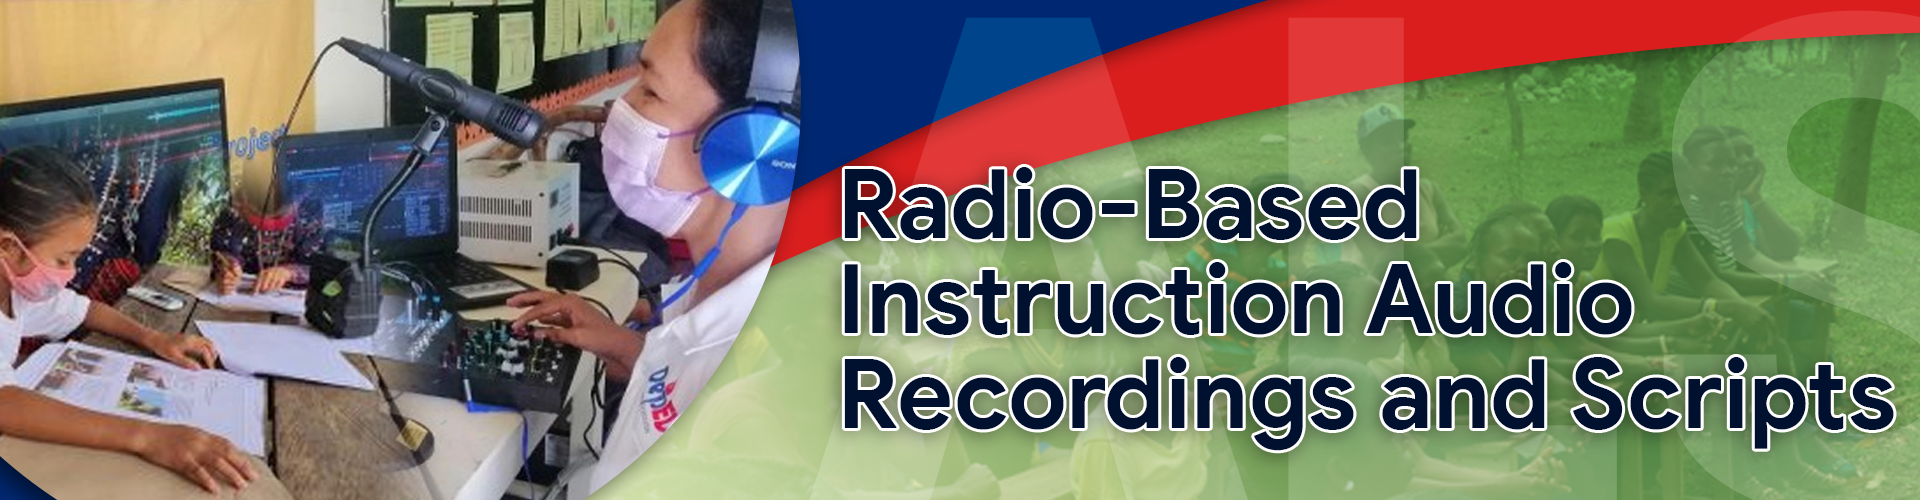 A&E Radio-Based Instruction Audio Recordings and Scripts